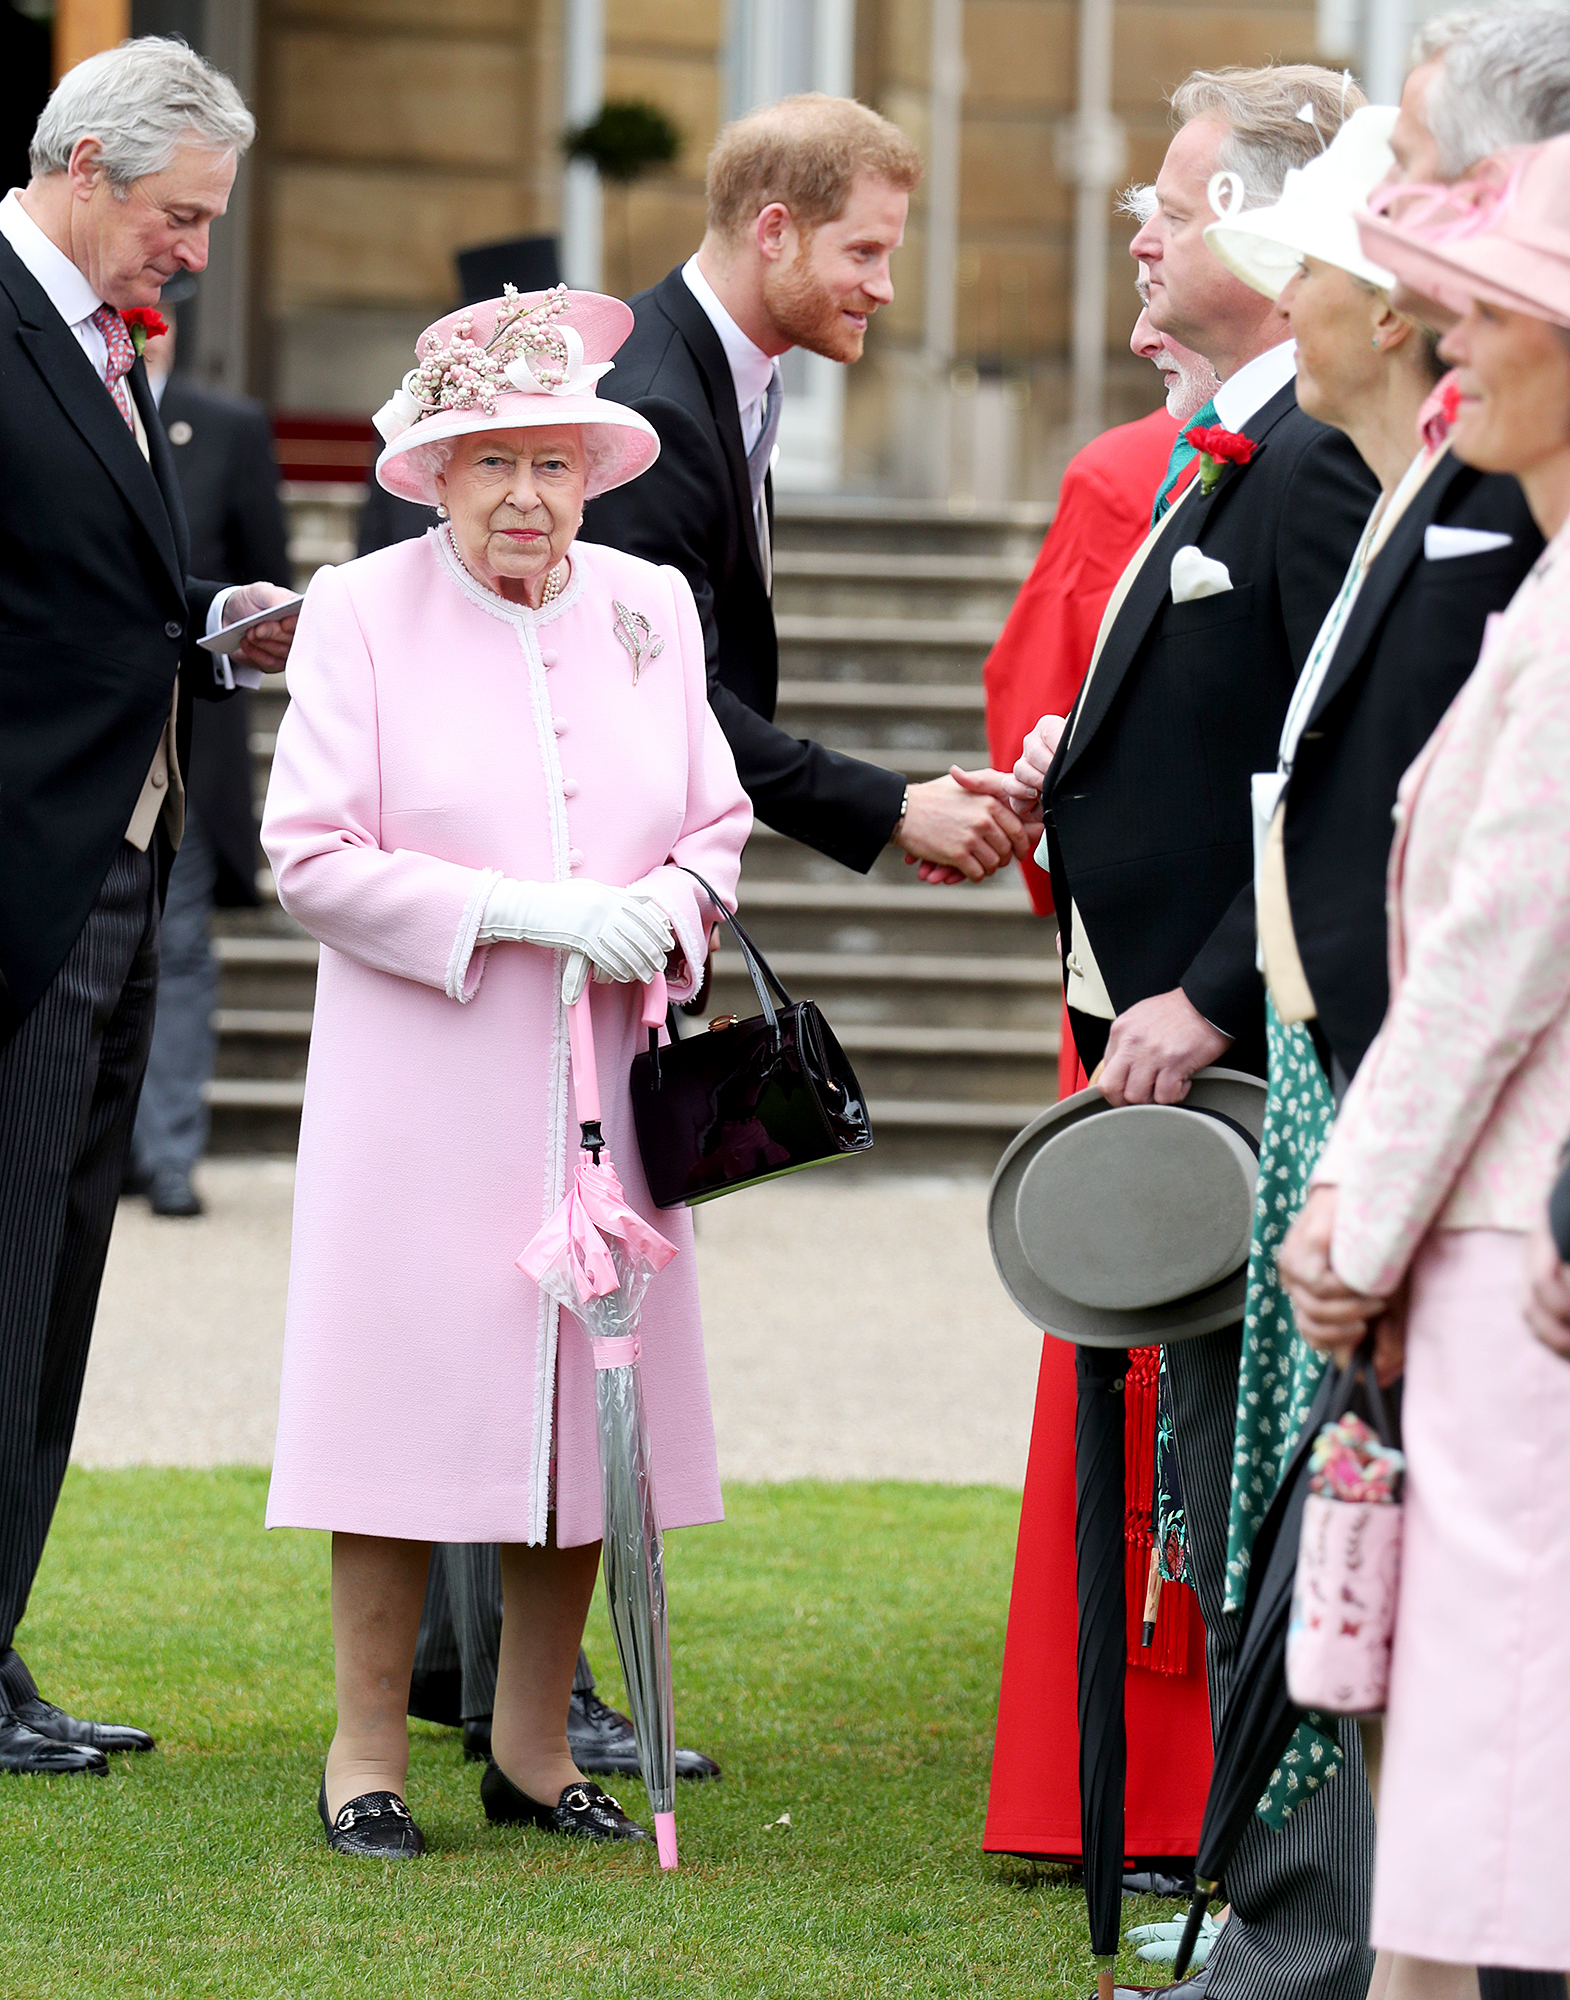 Prince-Harry-Doubles-Up-on-Events-With-Queen-Elizabeth